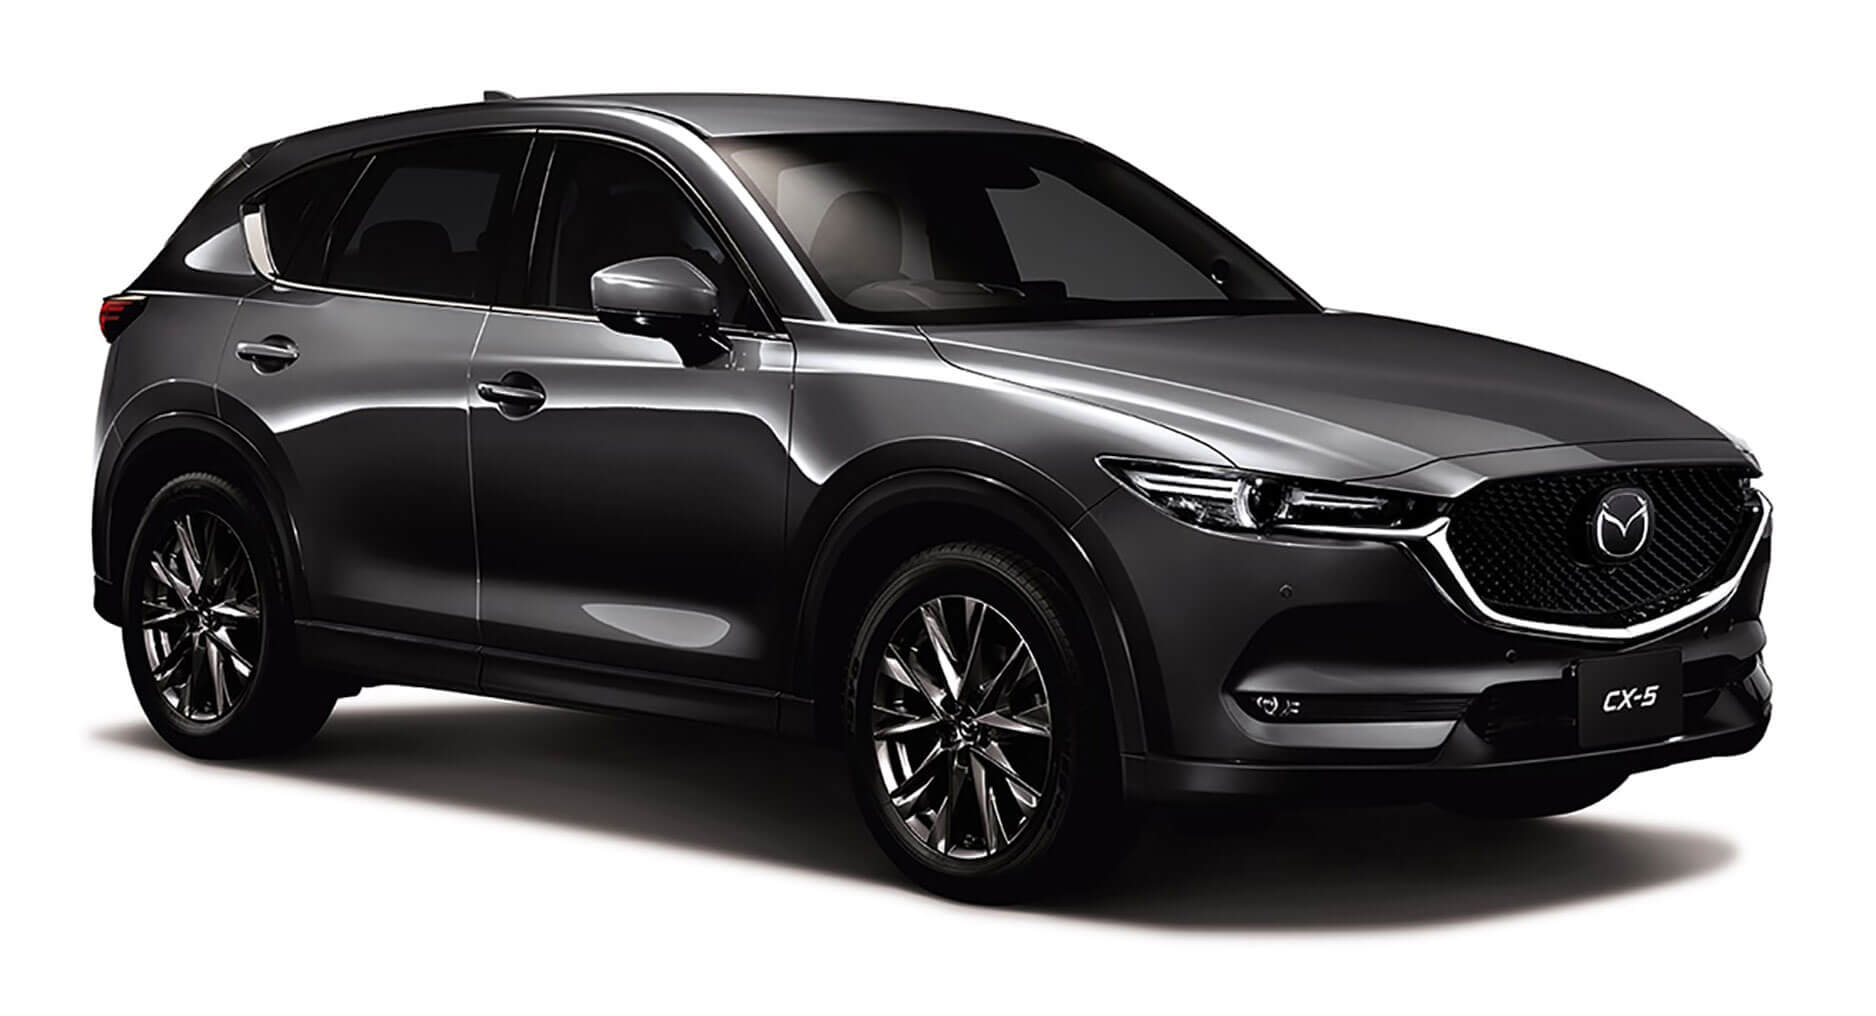 19 Mazda Cx 5 Debuts In Japan With Cx 9 S 2 5t Engine Exclusive Mode Special Edition Carscoops